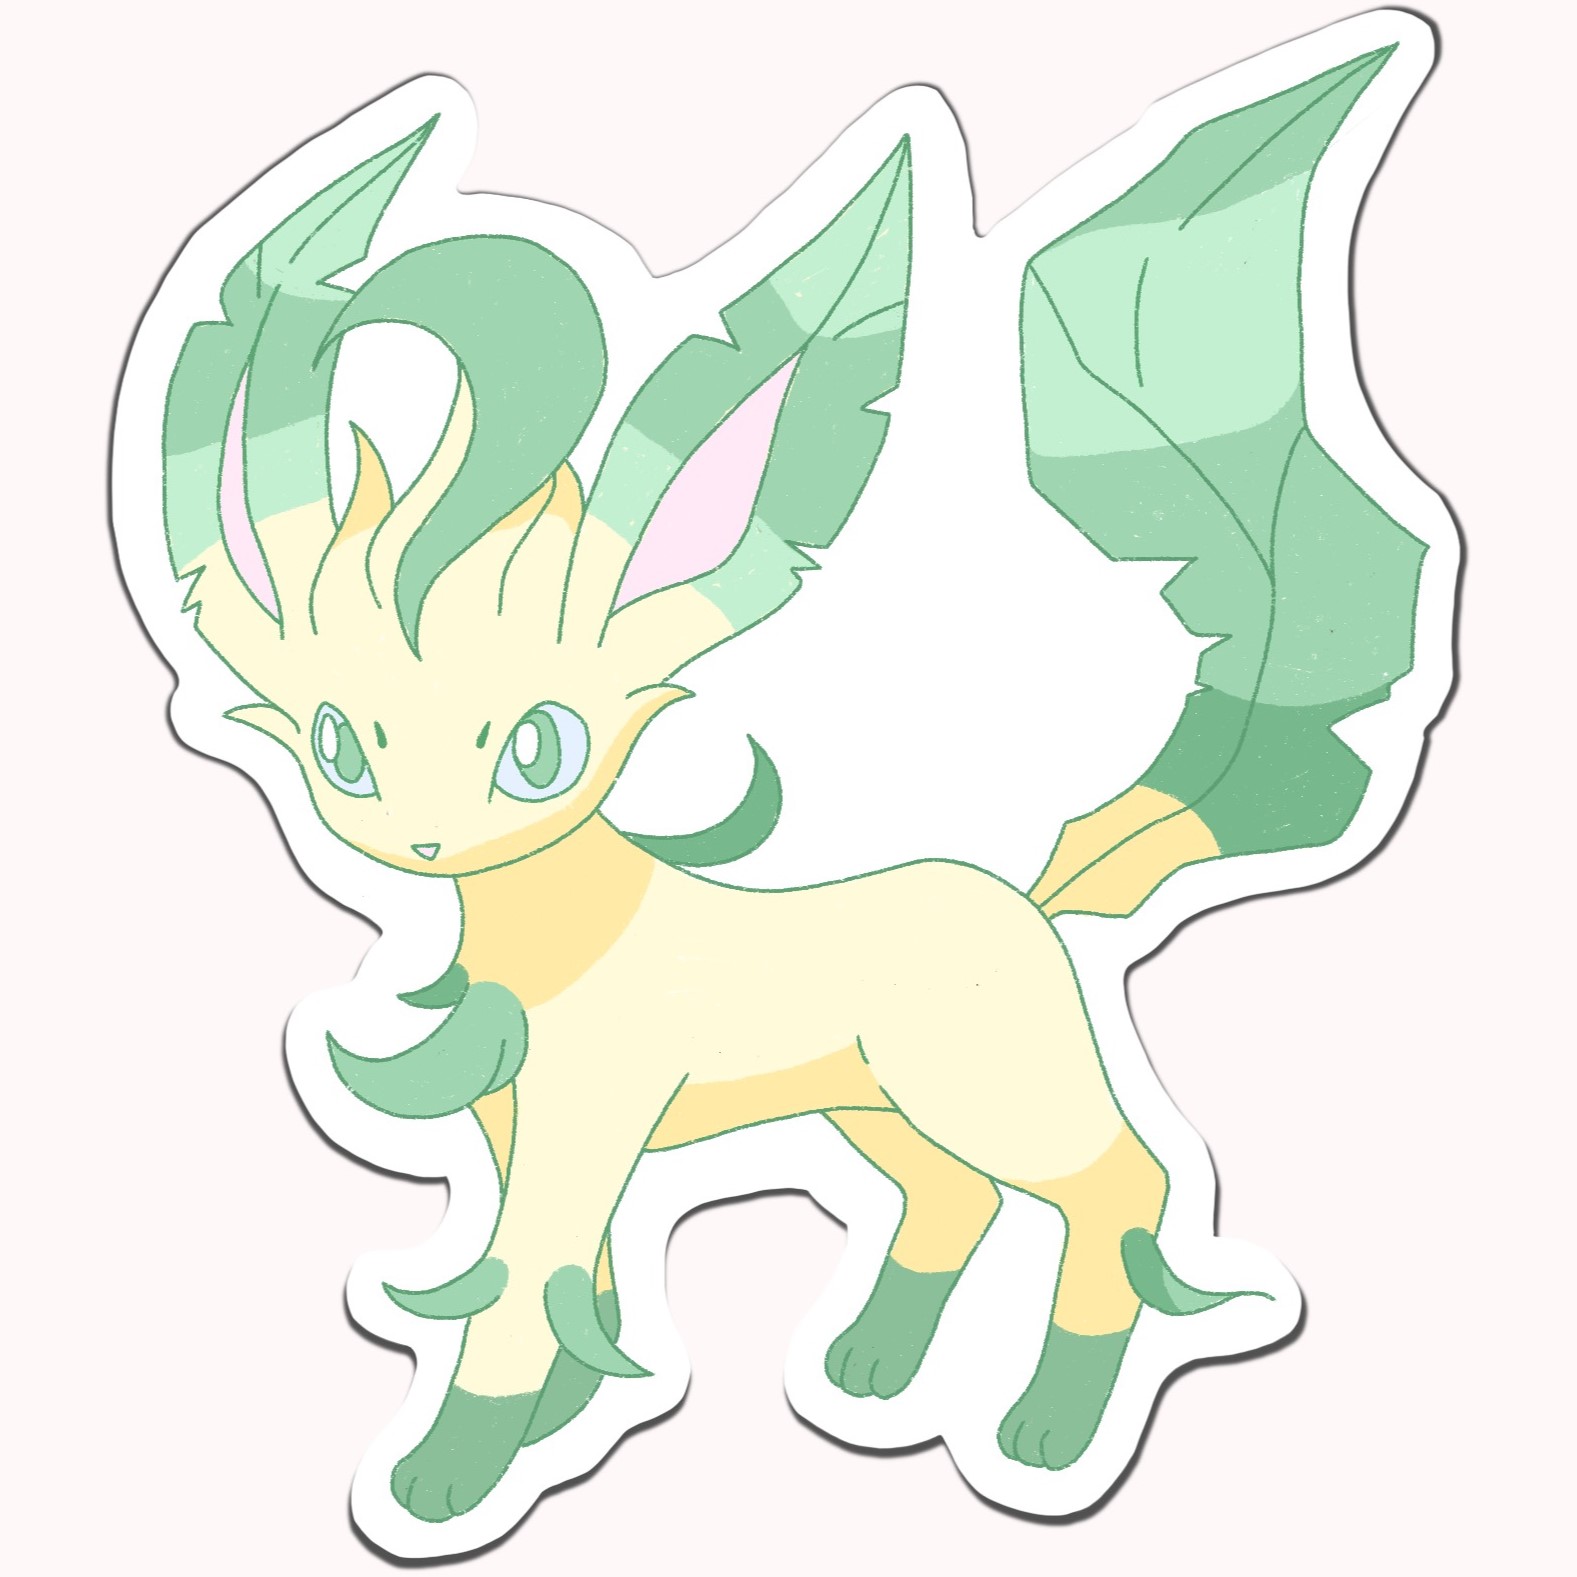 Leafeon sticker design. Shows Leafeon the Pokemon in a yellow and green color scheme with a pop of pink.